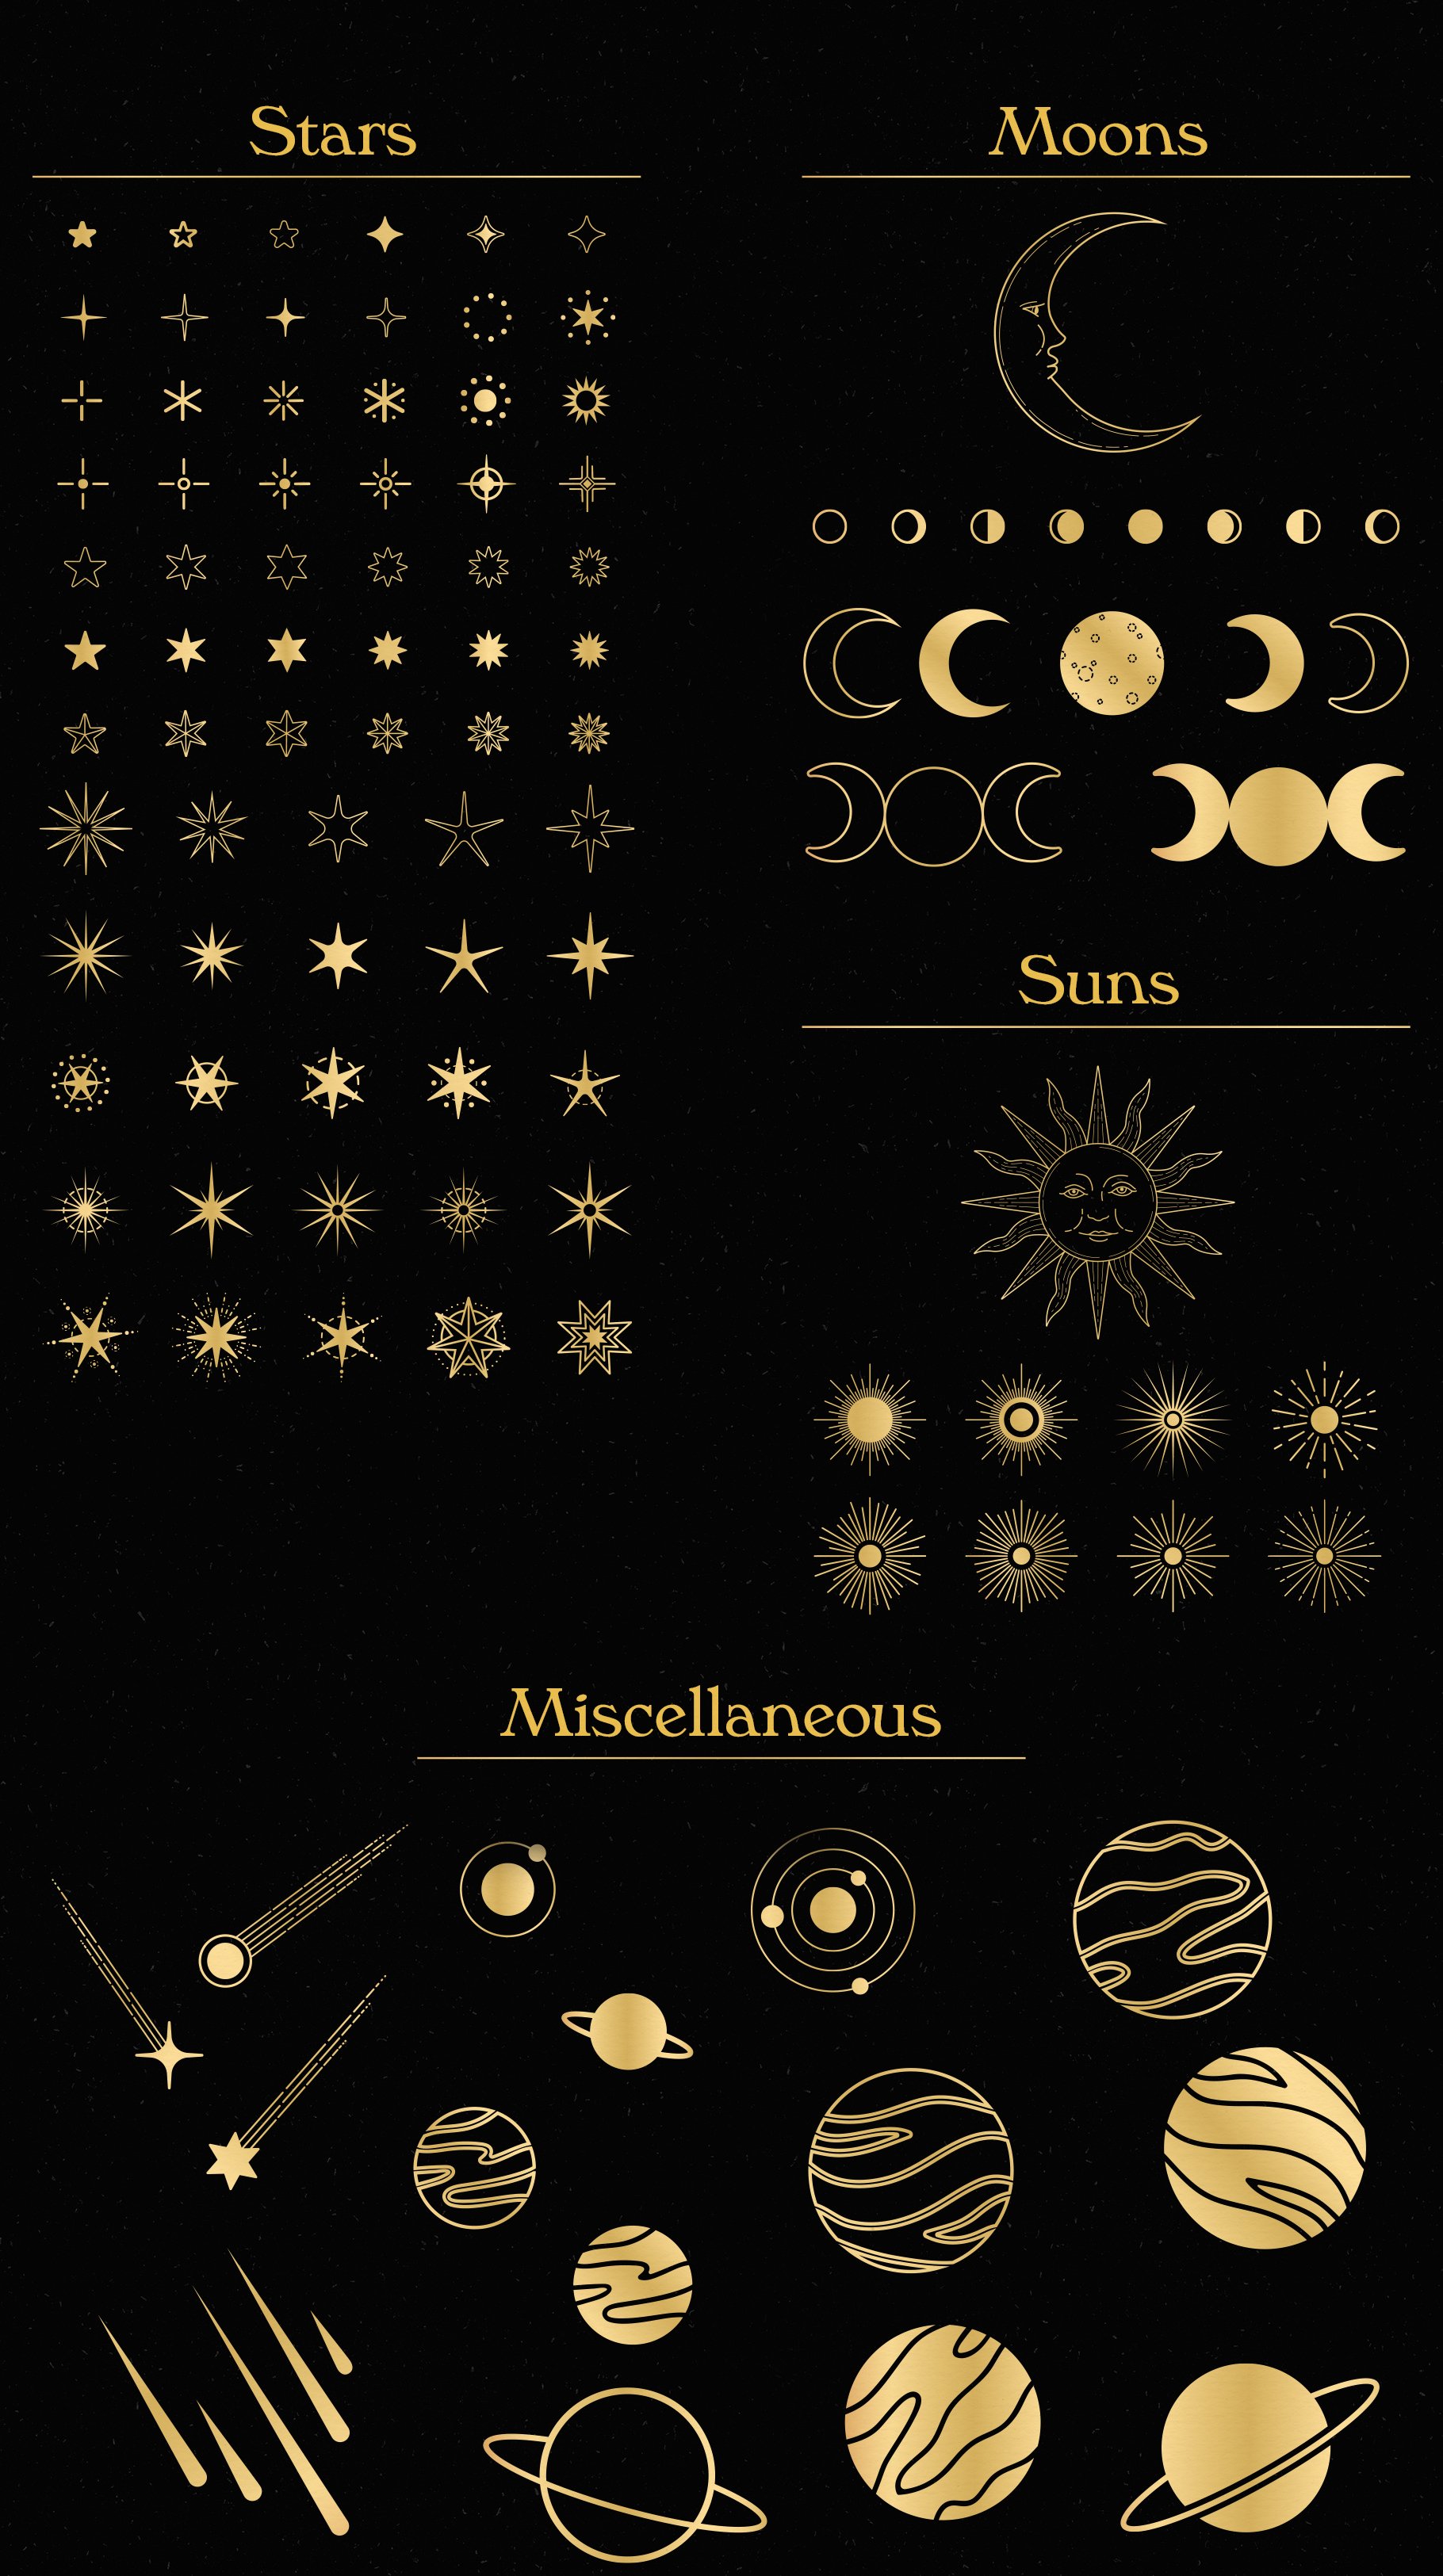 stars and celestial bodies by megs lang prvw 05 759